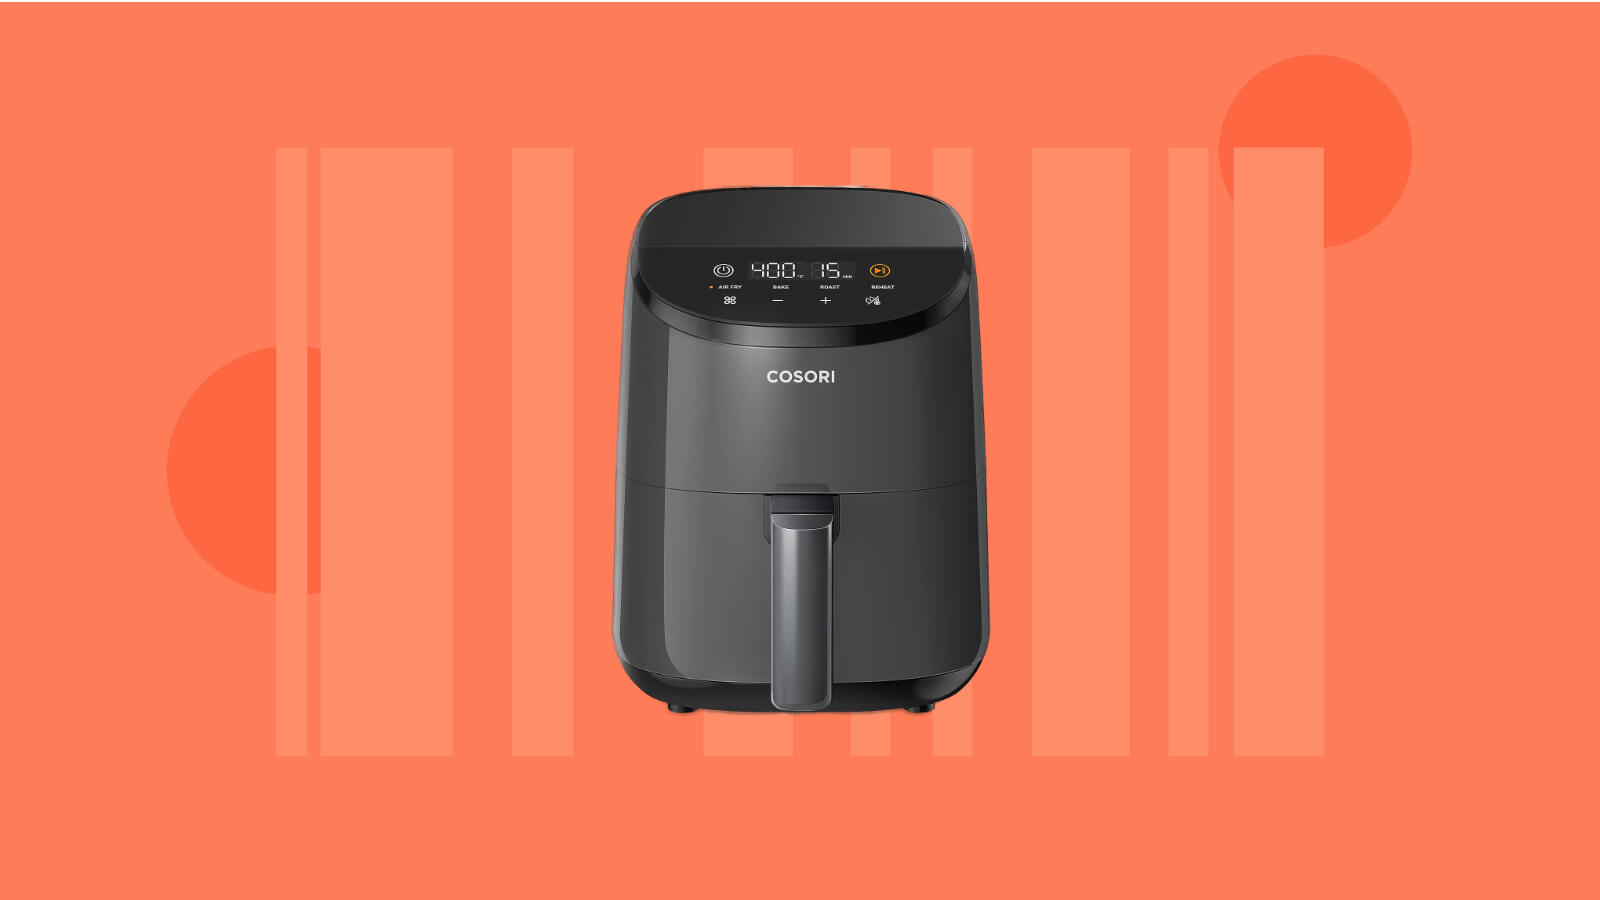 Upgrade your holiday kitchen arsenal with an 8-qt. Instant Pot dual-basket  air fryer at $150 ($50 off)